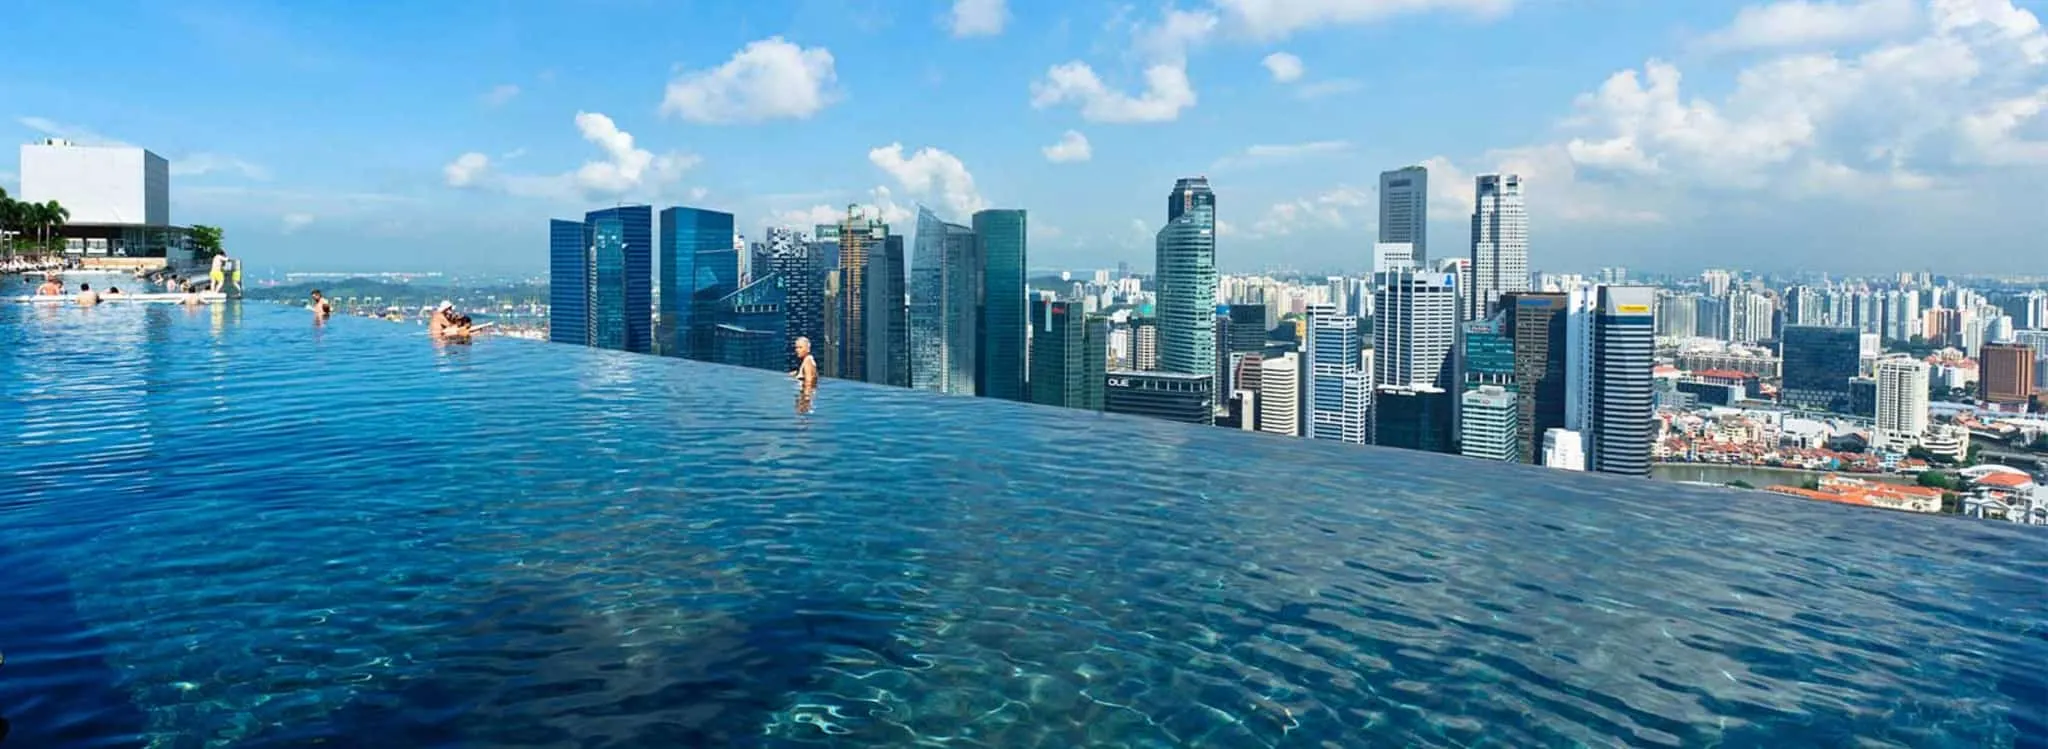 Marina Bay Sands Infinity Pool - the world's largest and highest infinity pool. TravelingWellForLess.com